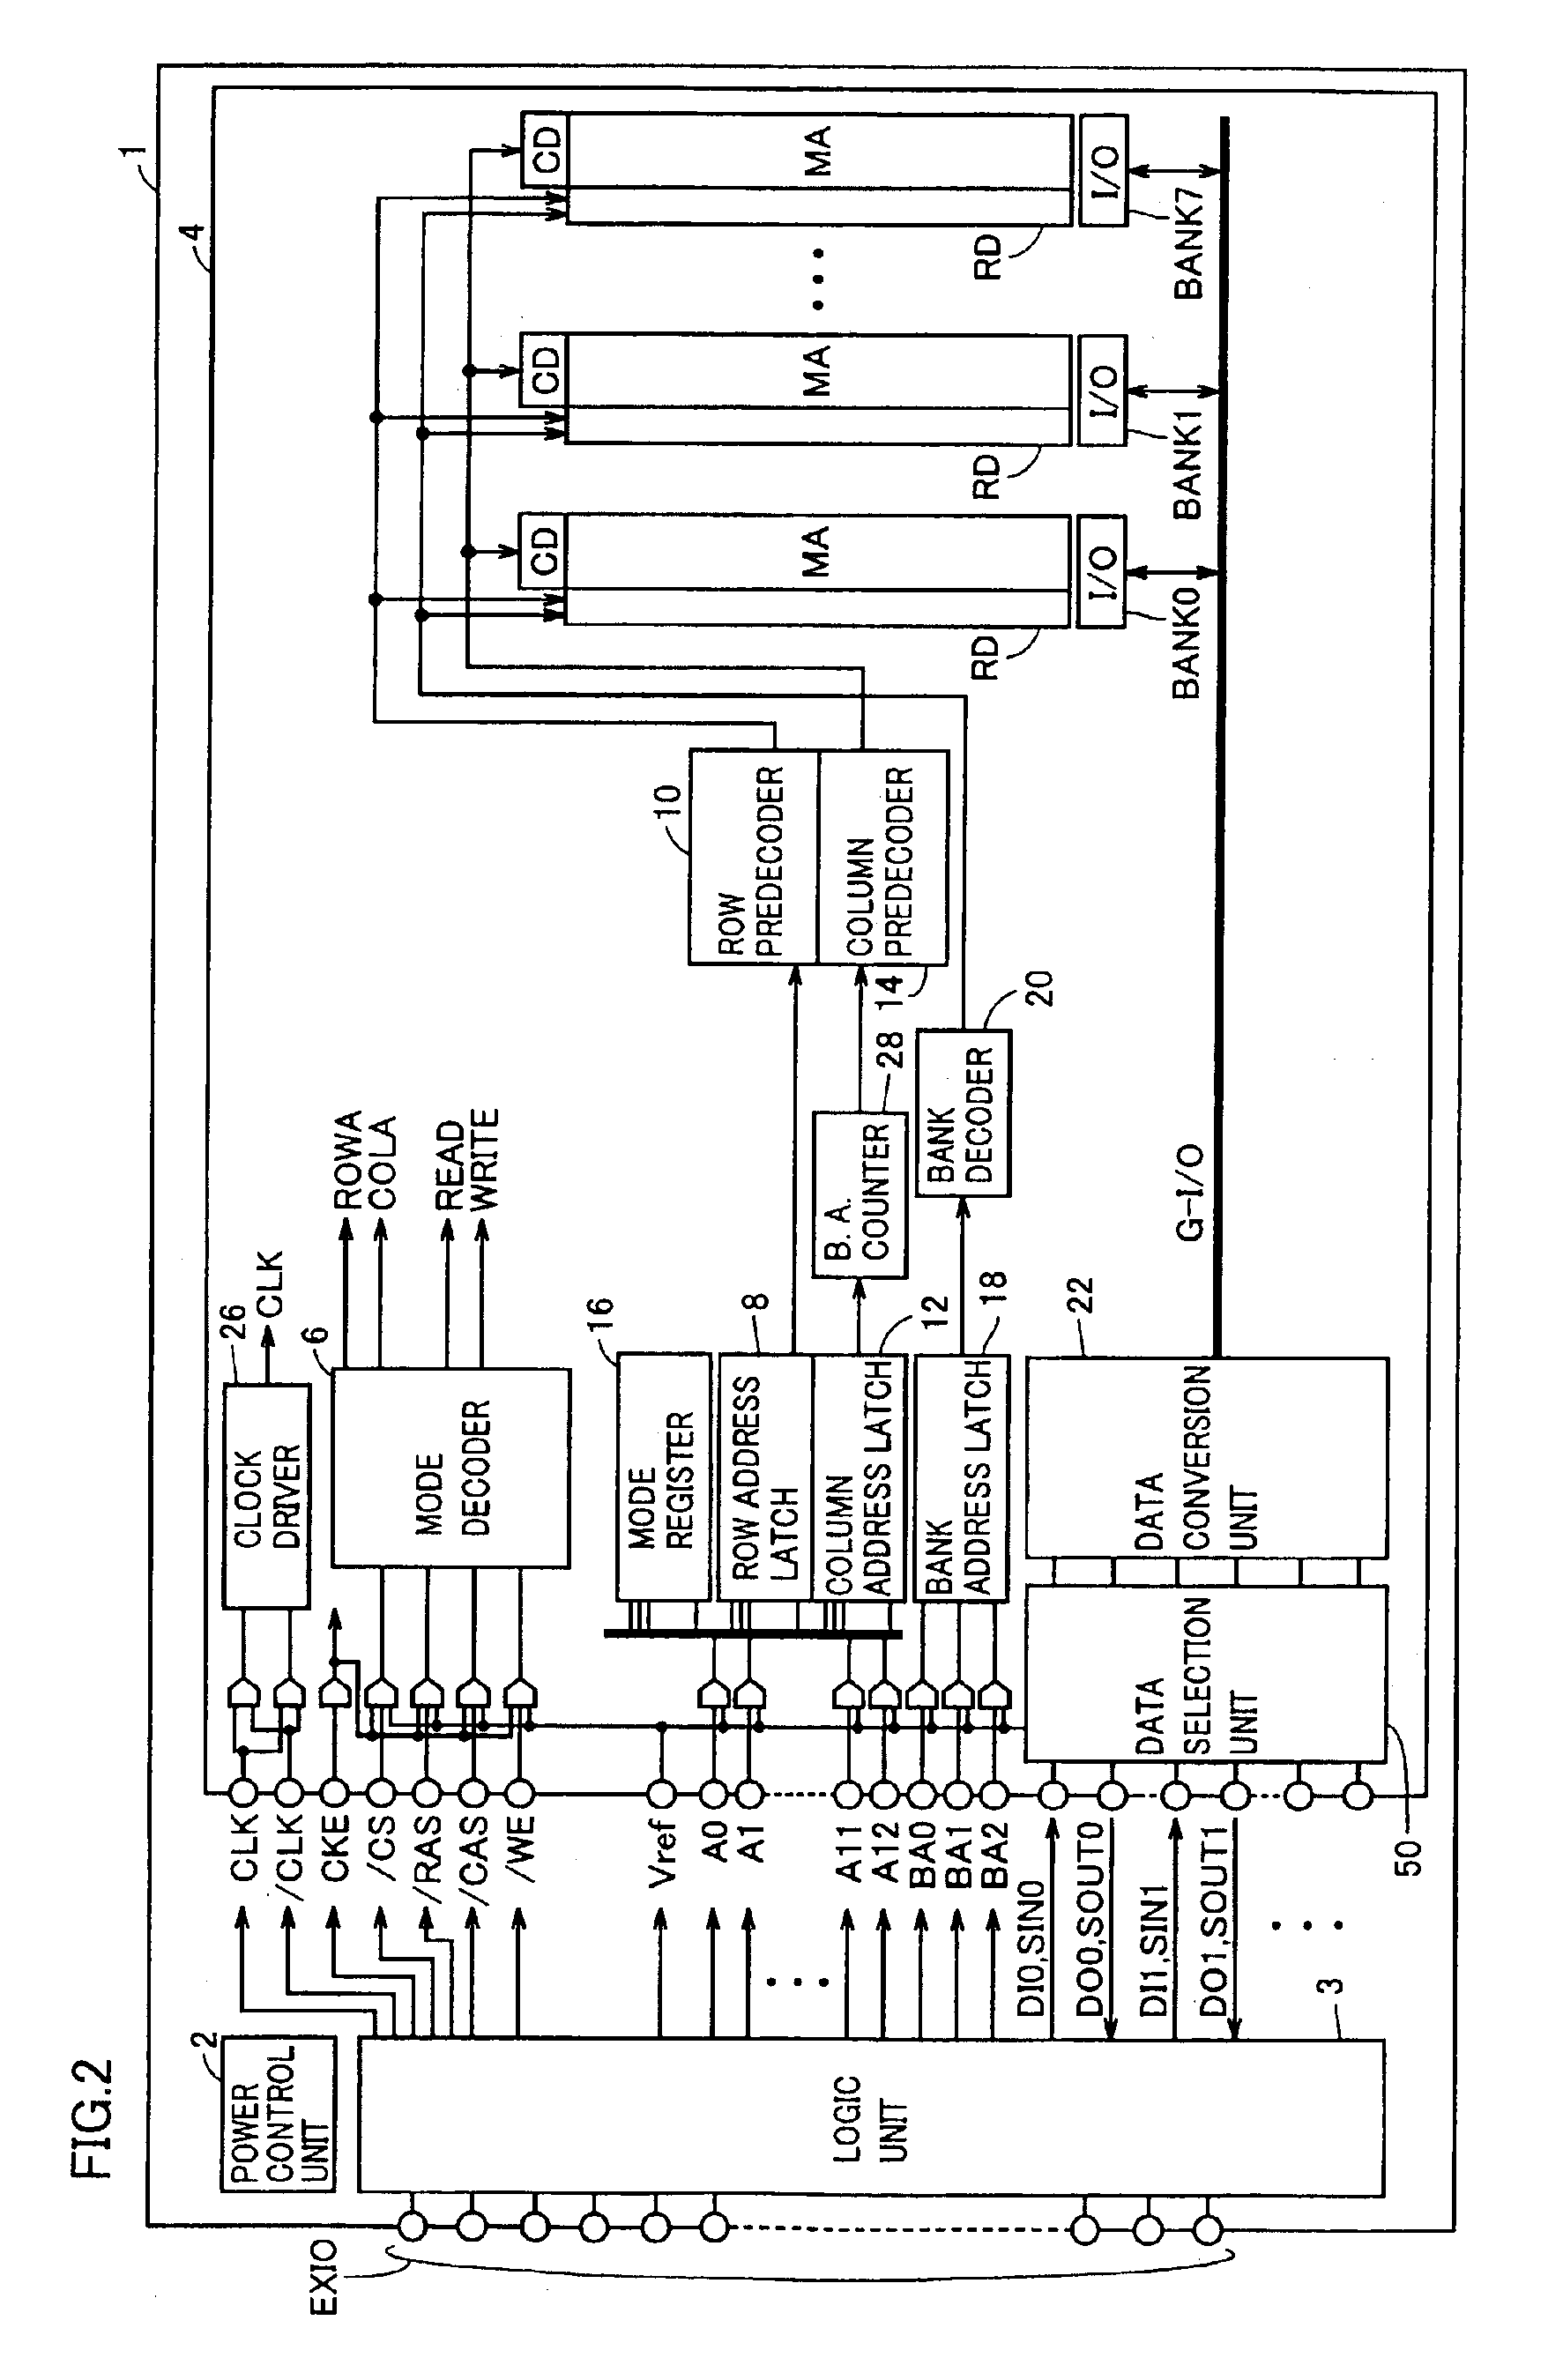 Semiconductor device saving data in non-volatile manner during standby